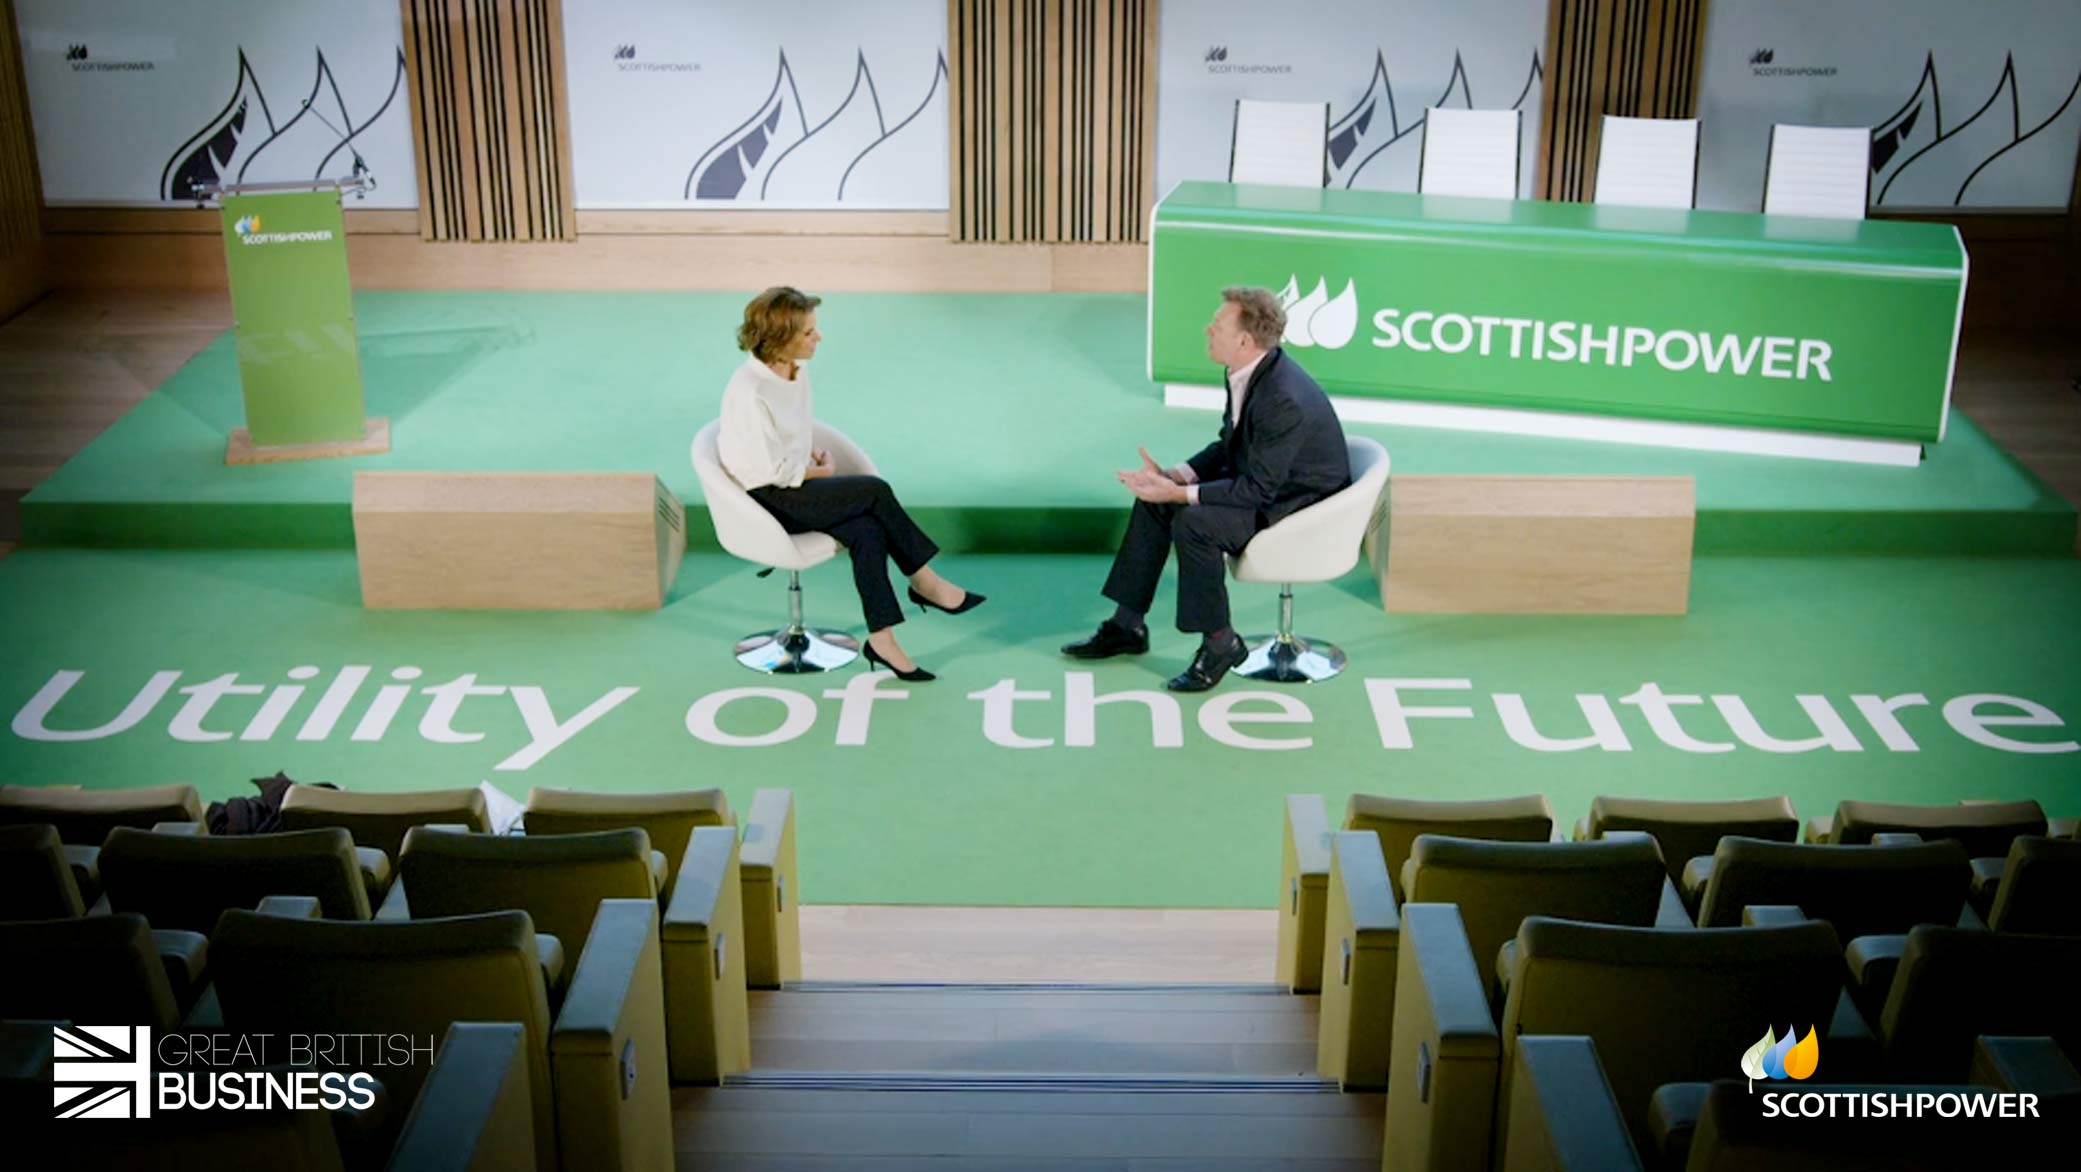 A better business future, quicker: ScottishPower is championing Great British Business